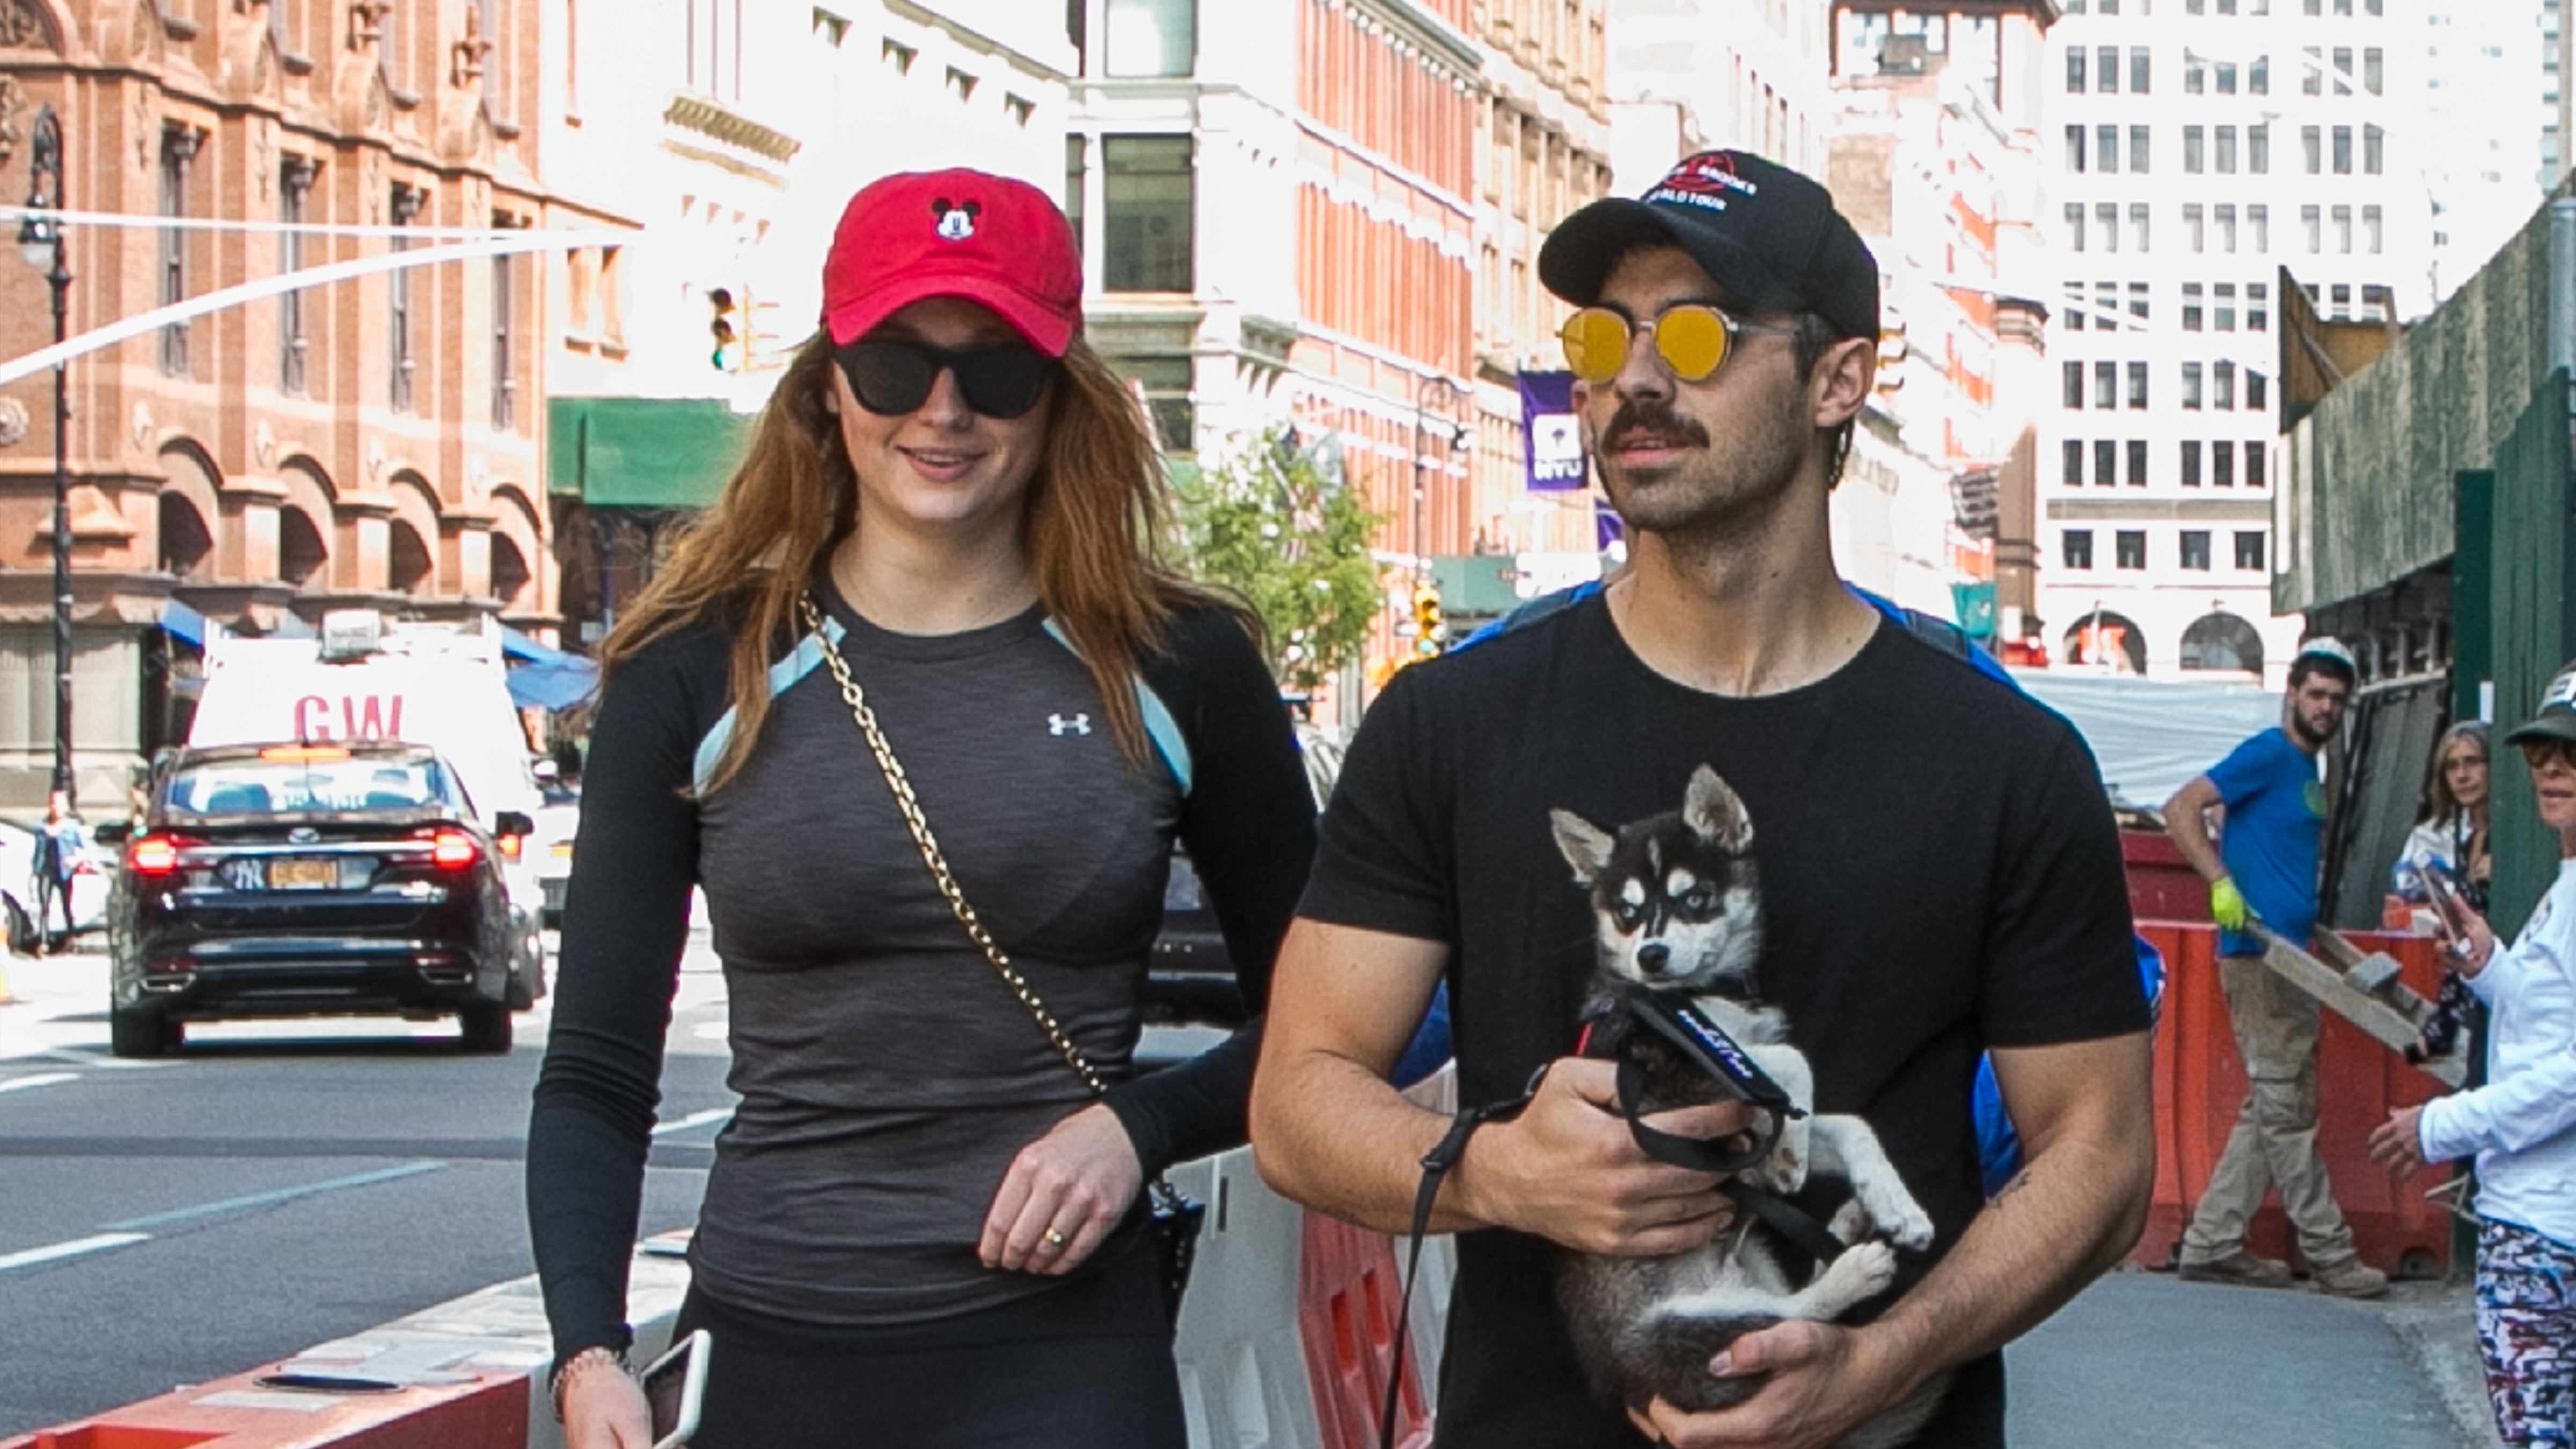 Kevin Jonas gushes over wife Danielle while out promoting their